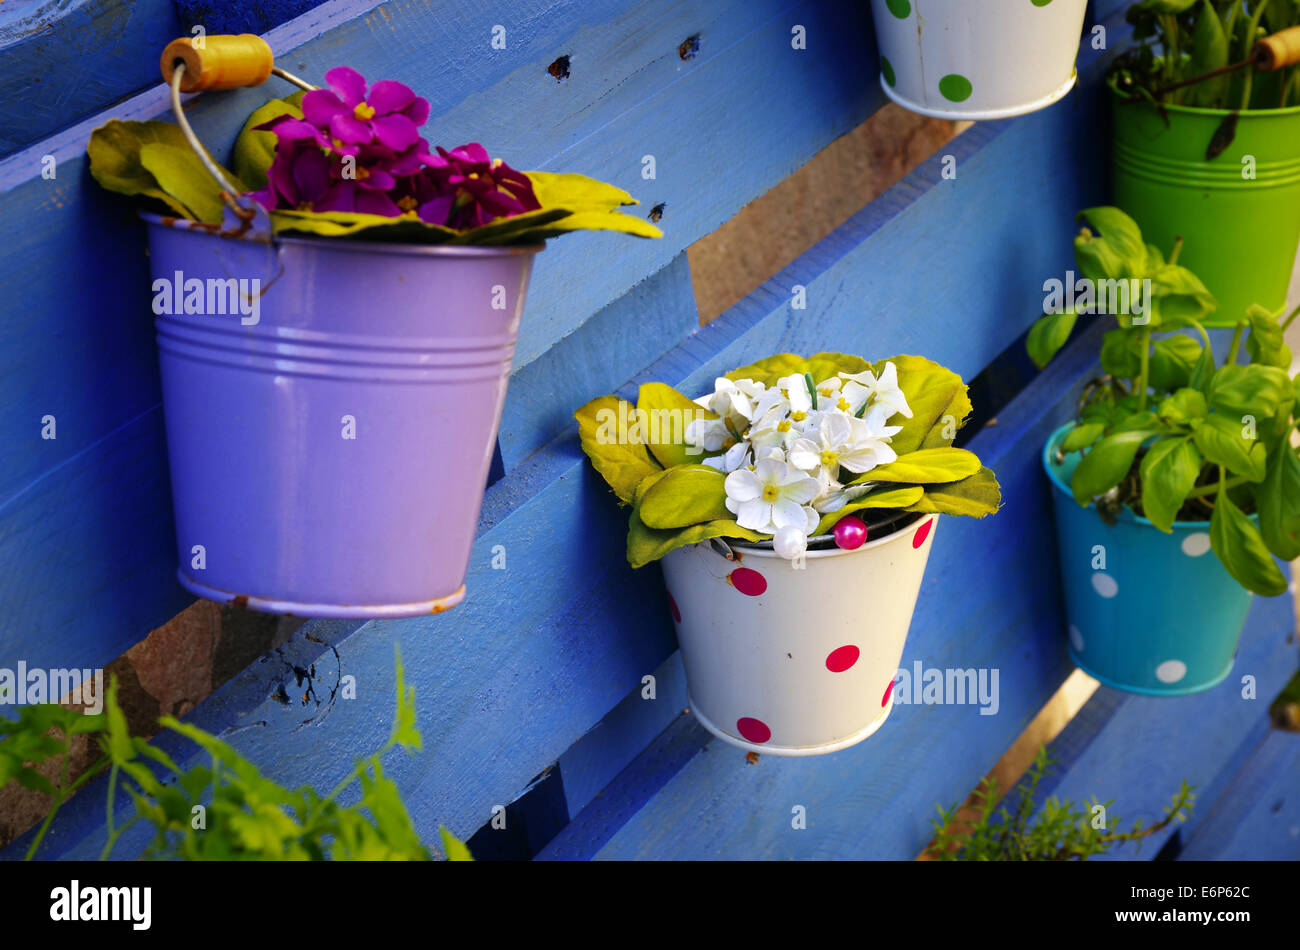 Colorful tin baskets with flowers hanged on blue wooden planks Stock Photo